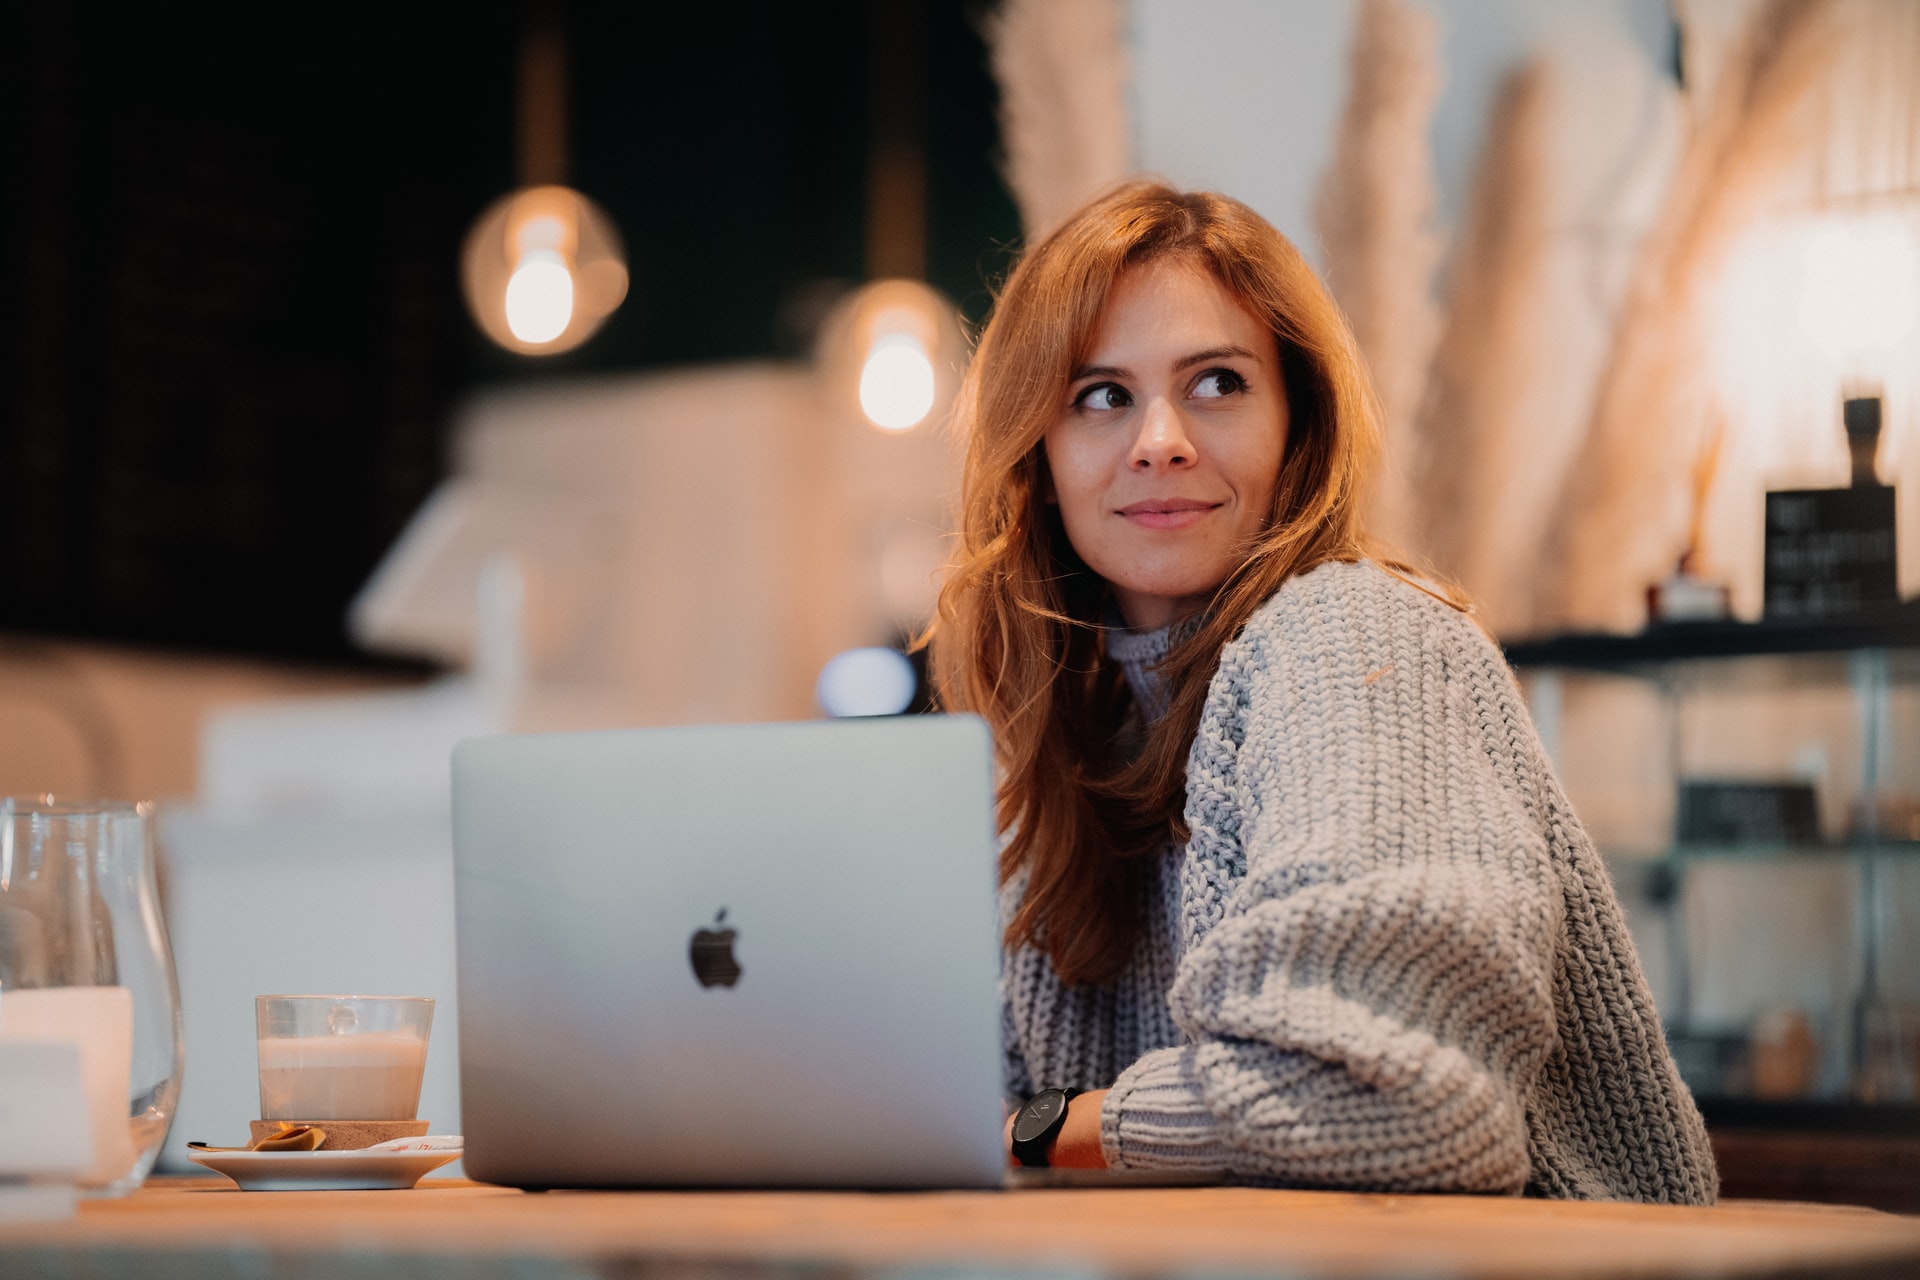 Person with red hair and grey sweater sits in a cafe, with their laptop.